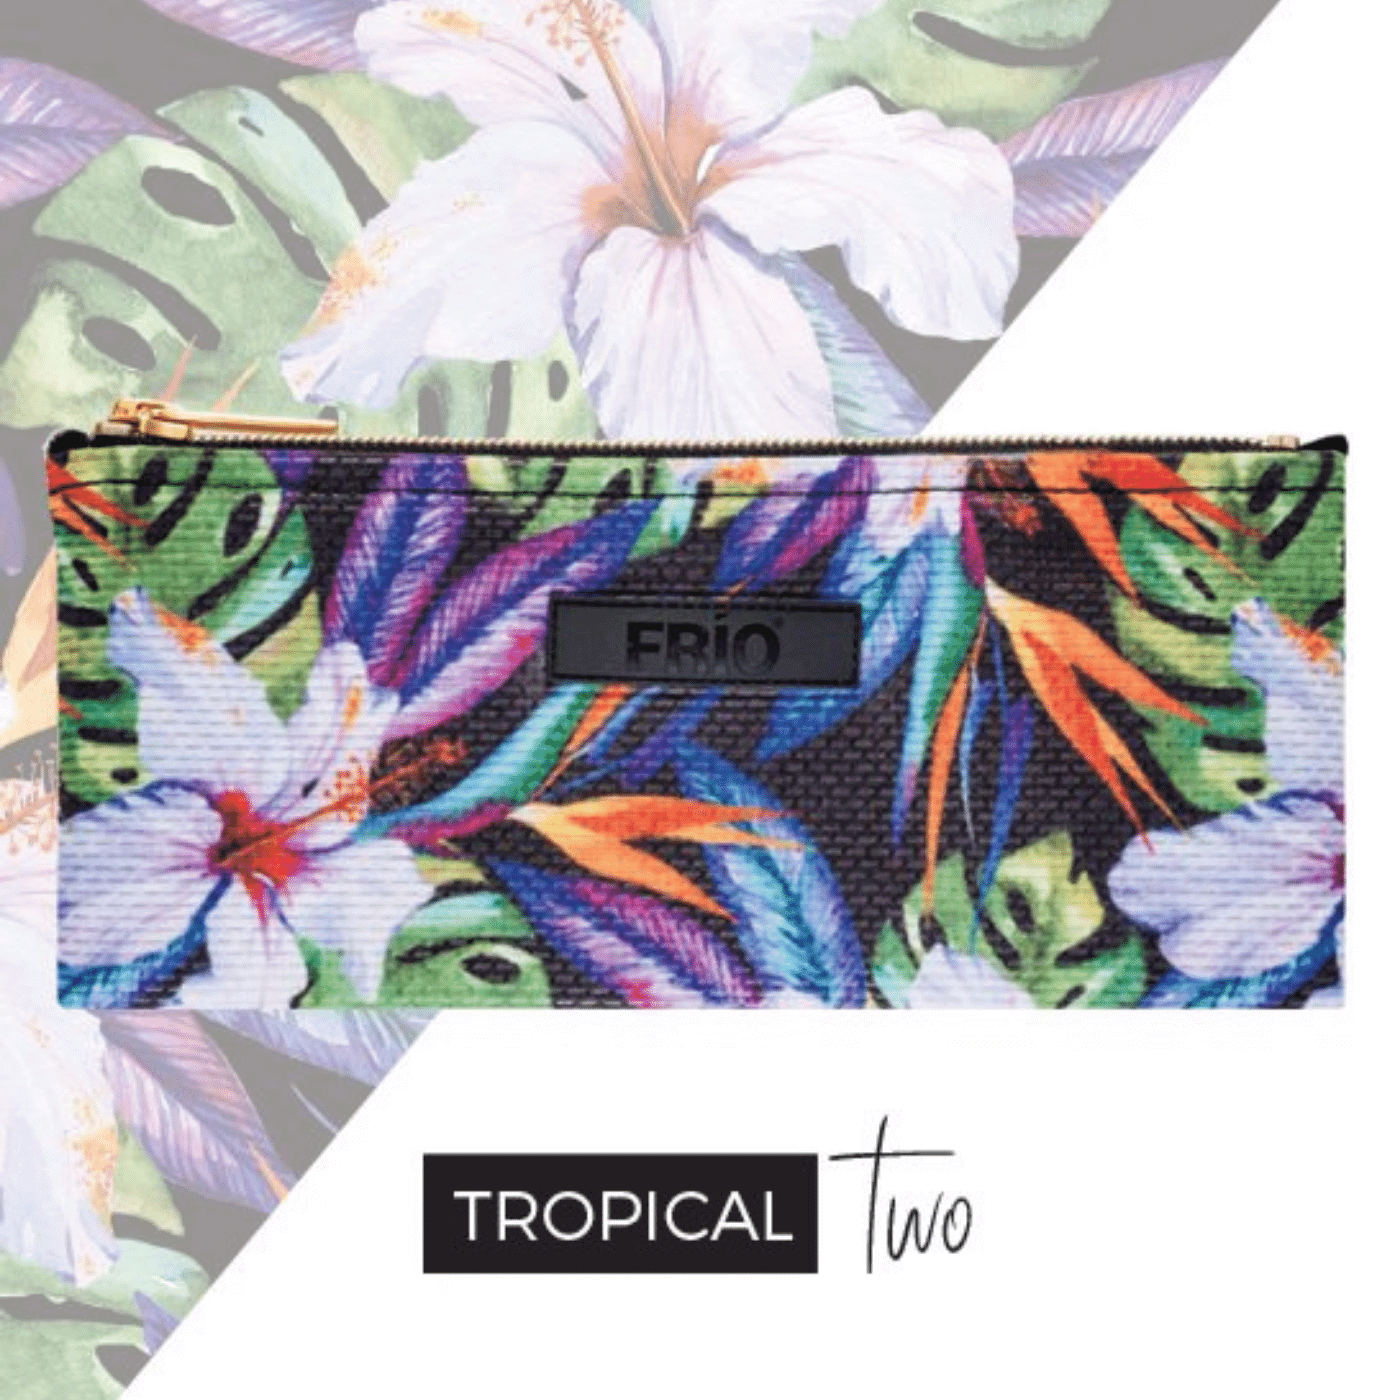 Frio Two Cooling Wallet Tropical|Frio Two Cooling Wallet Tropical|Frio Two Cooling Wallet Tropical|Frio Two Cooling Wallet Tropical|Frio Two Cooling Wallet Tropical